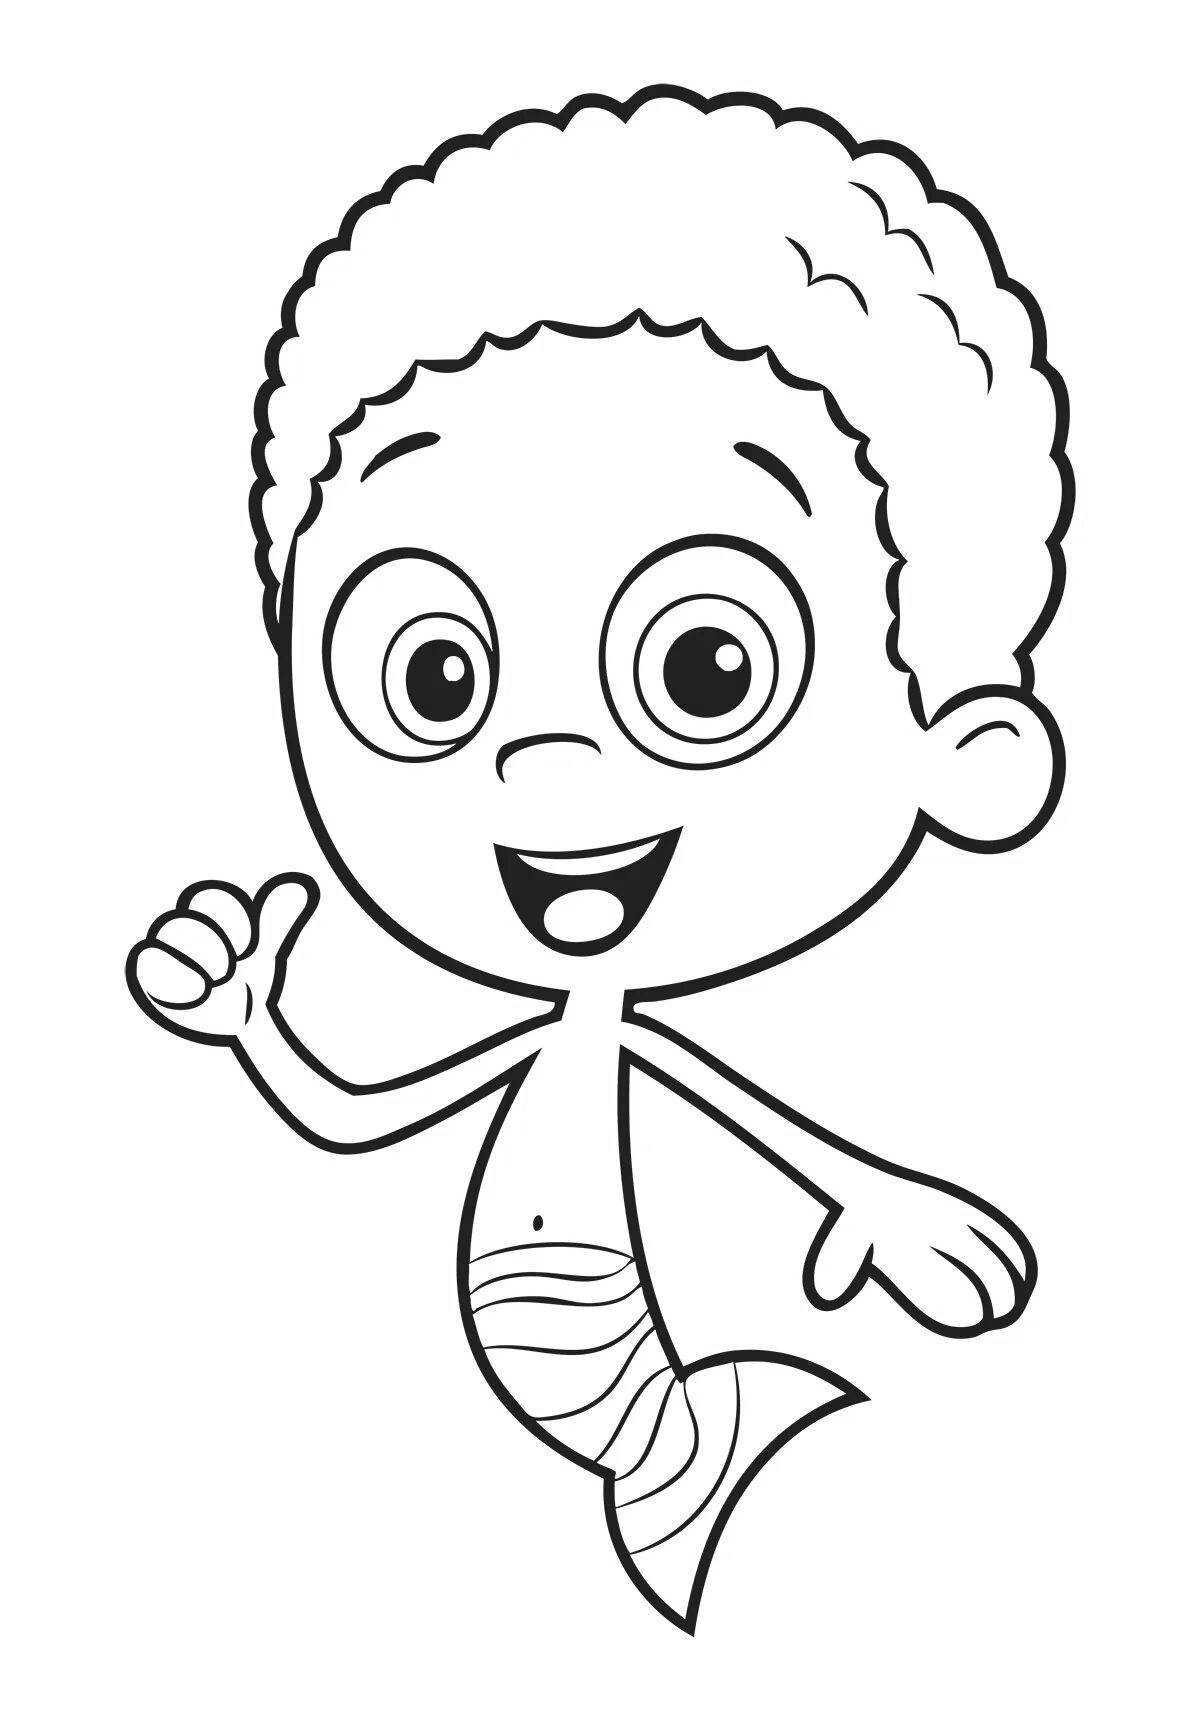 Coloring page energetic guppies